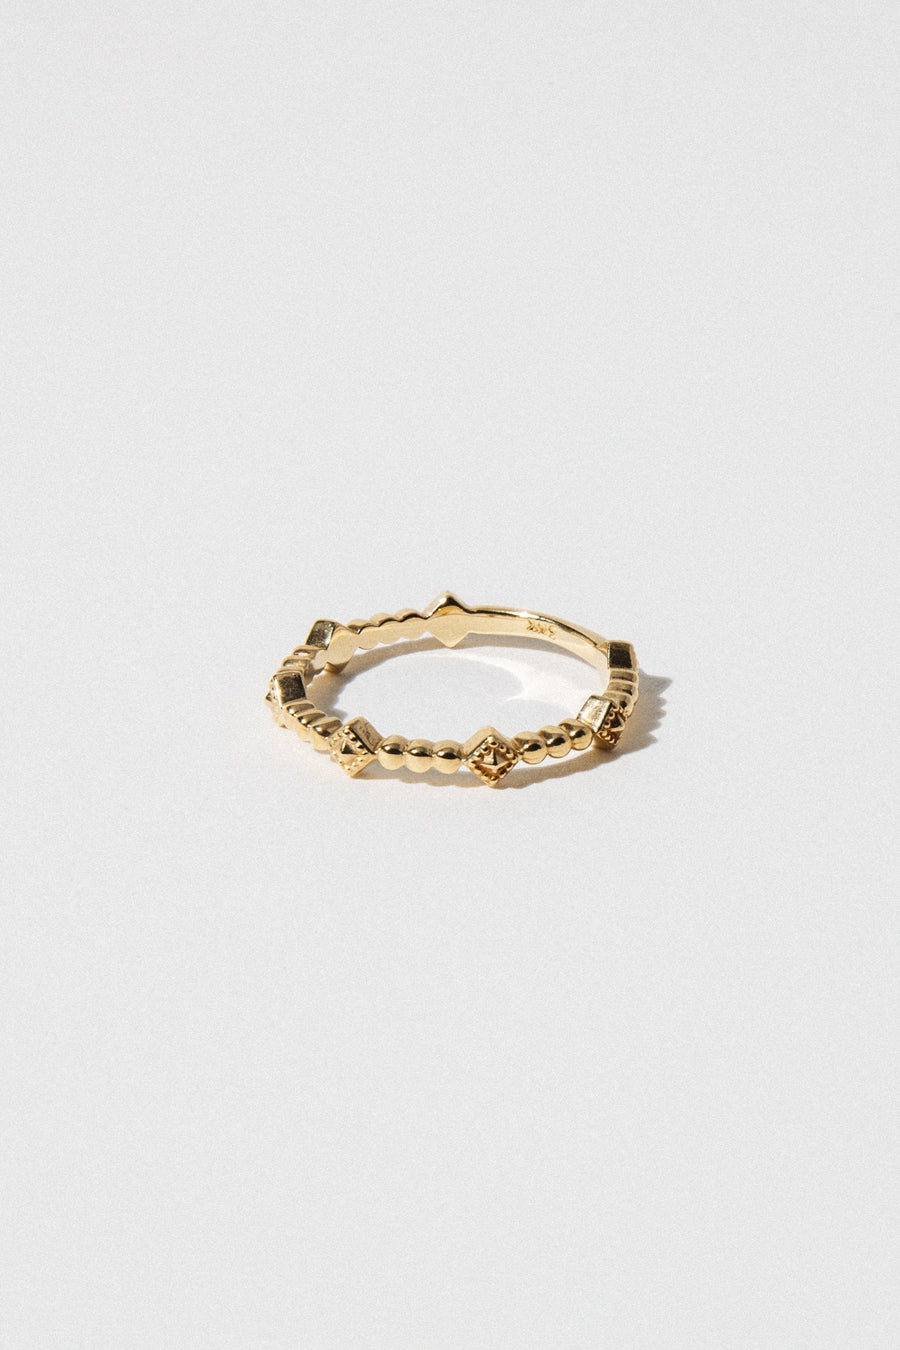 Stuller Jewelry Gold / US 7 Titian Ring